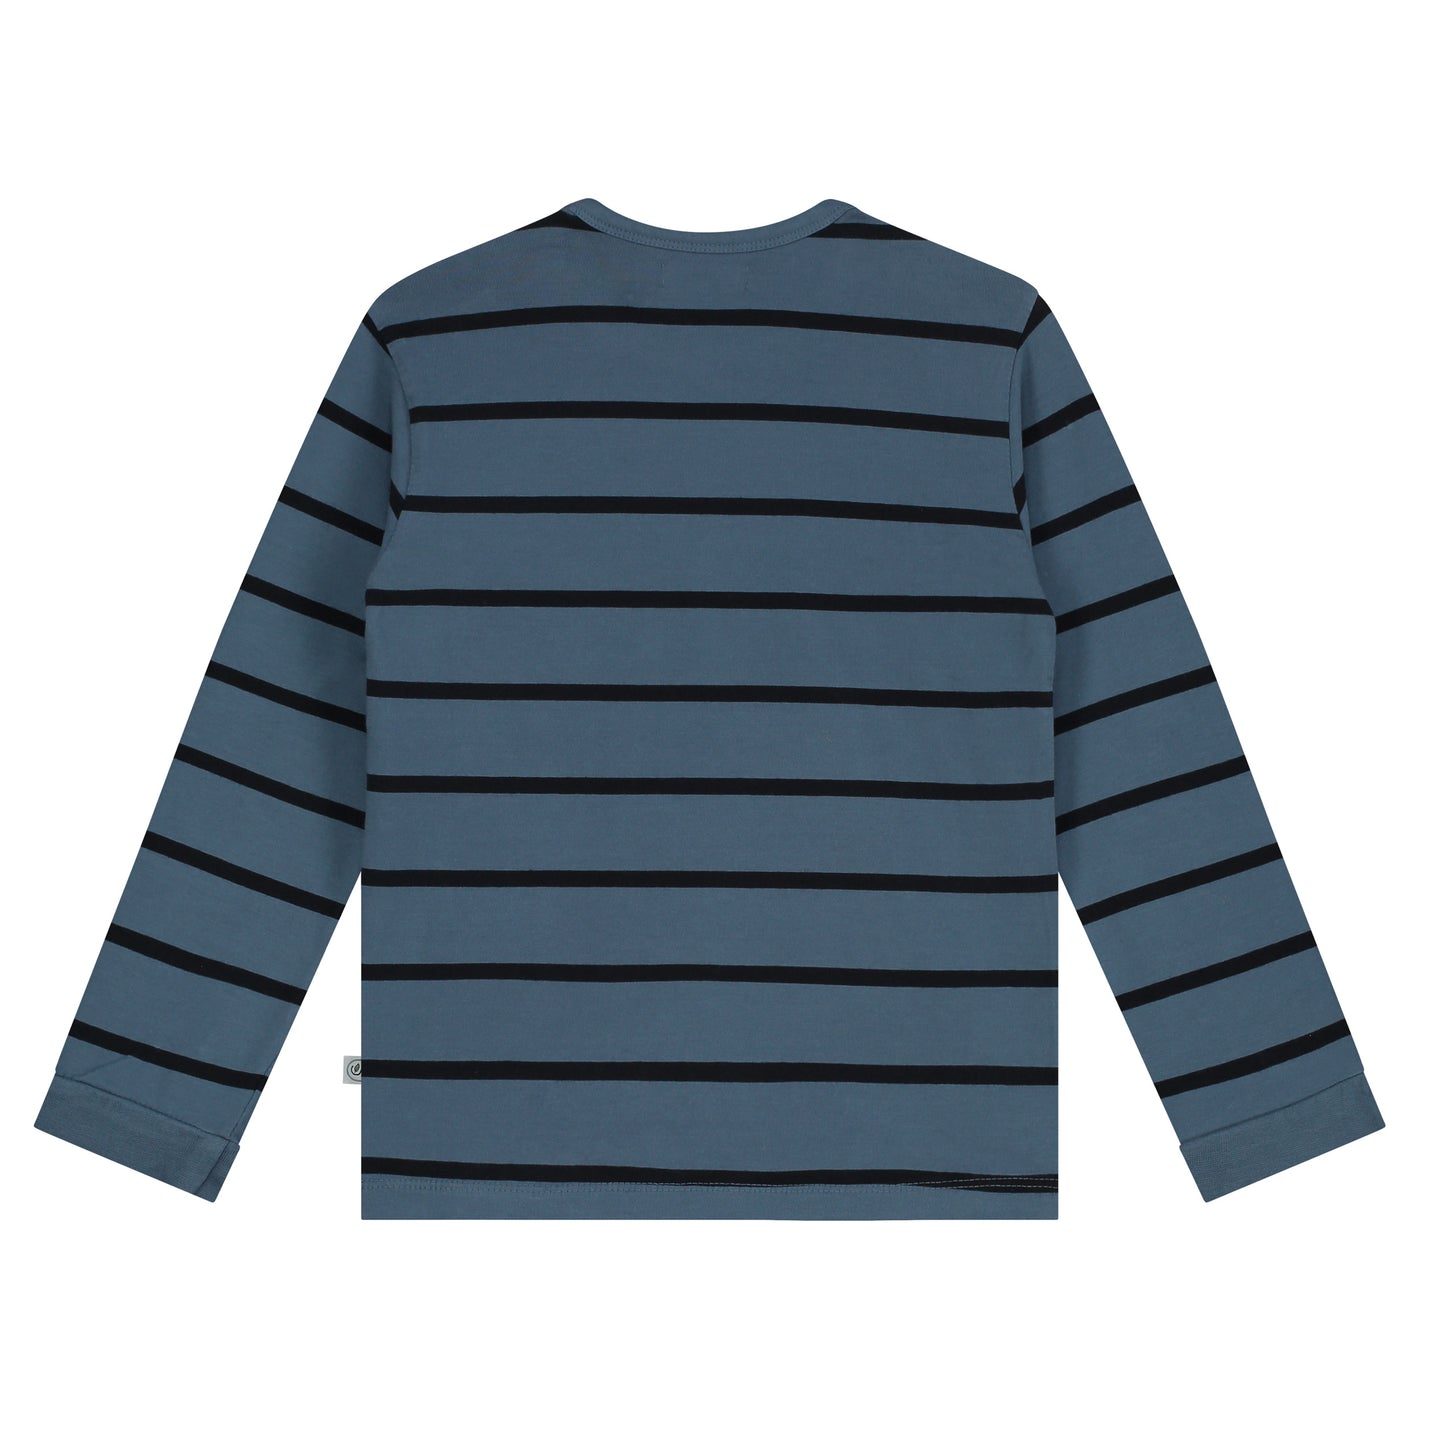 Yarn Dyed Stripes With Love Print T-Shirt LS